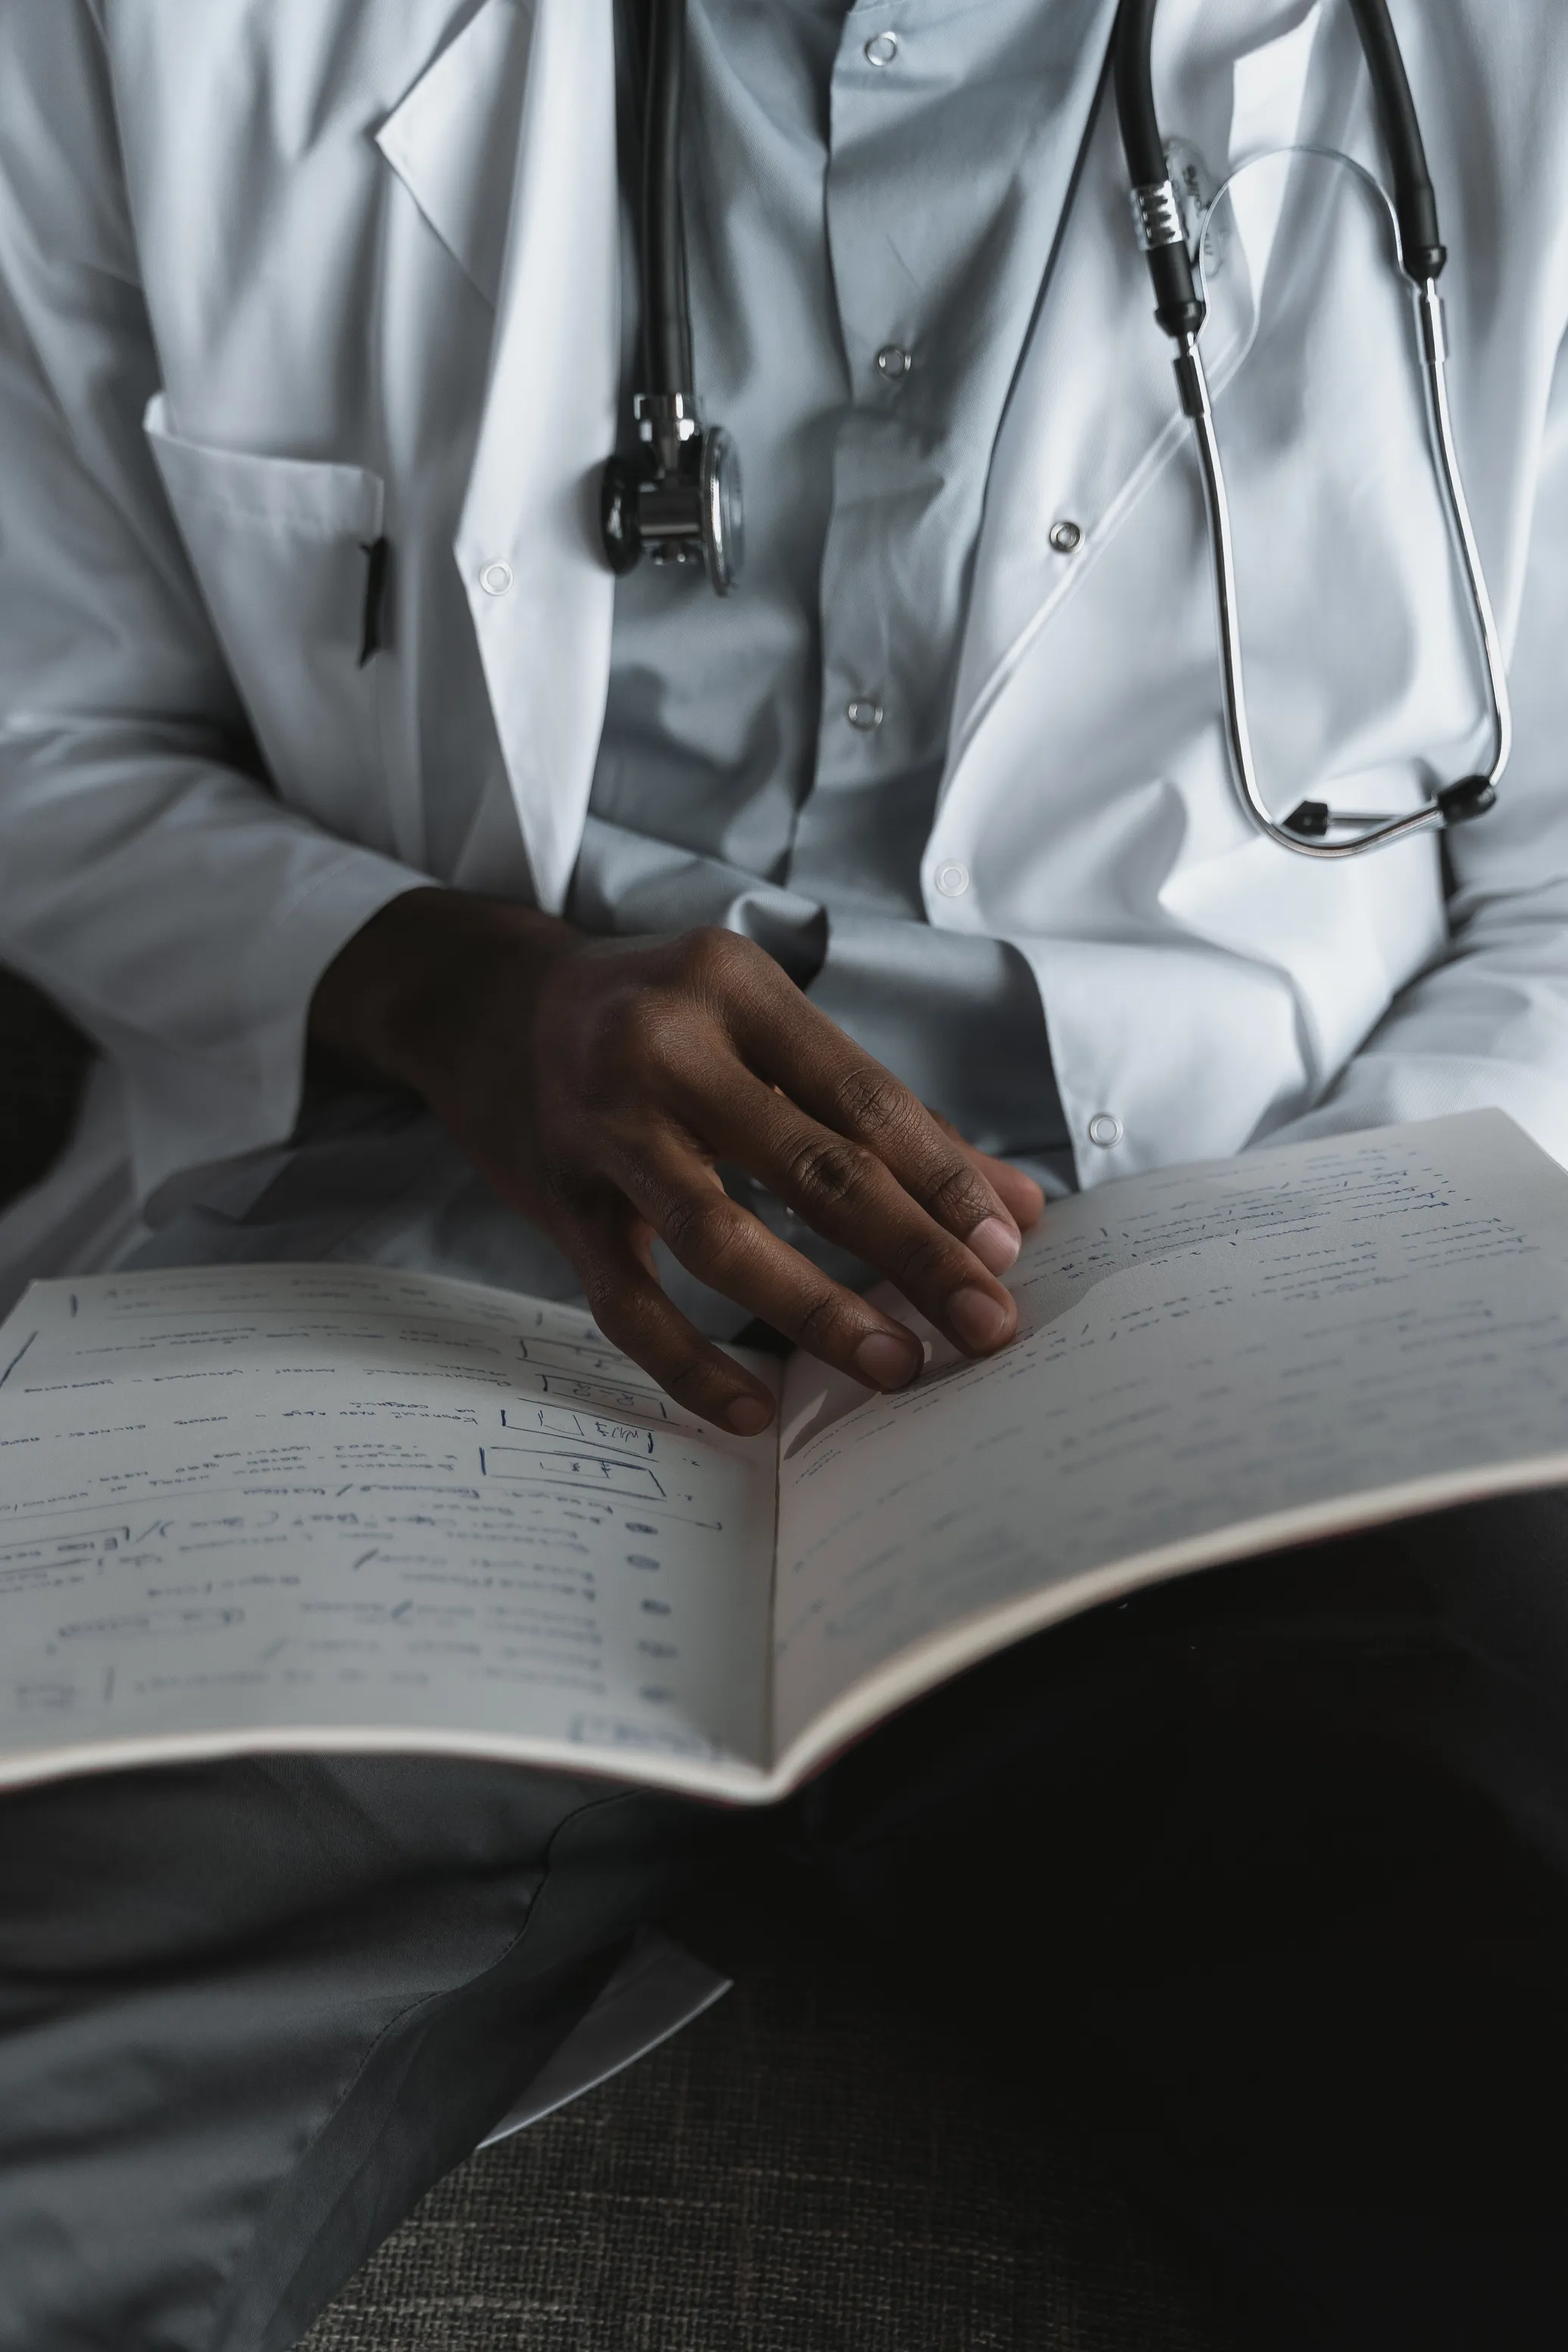 Physician searching through hand-written notes